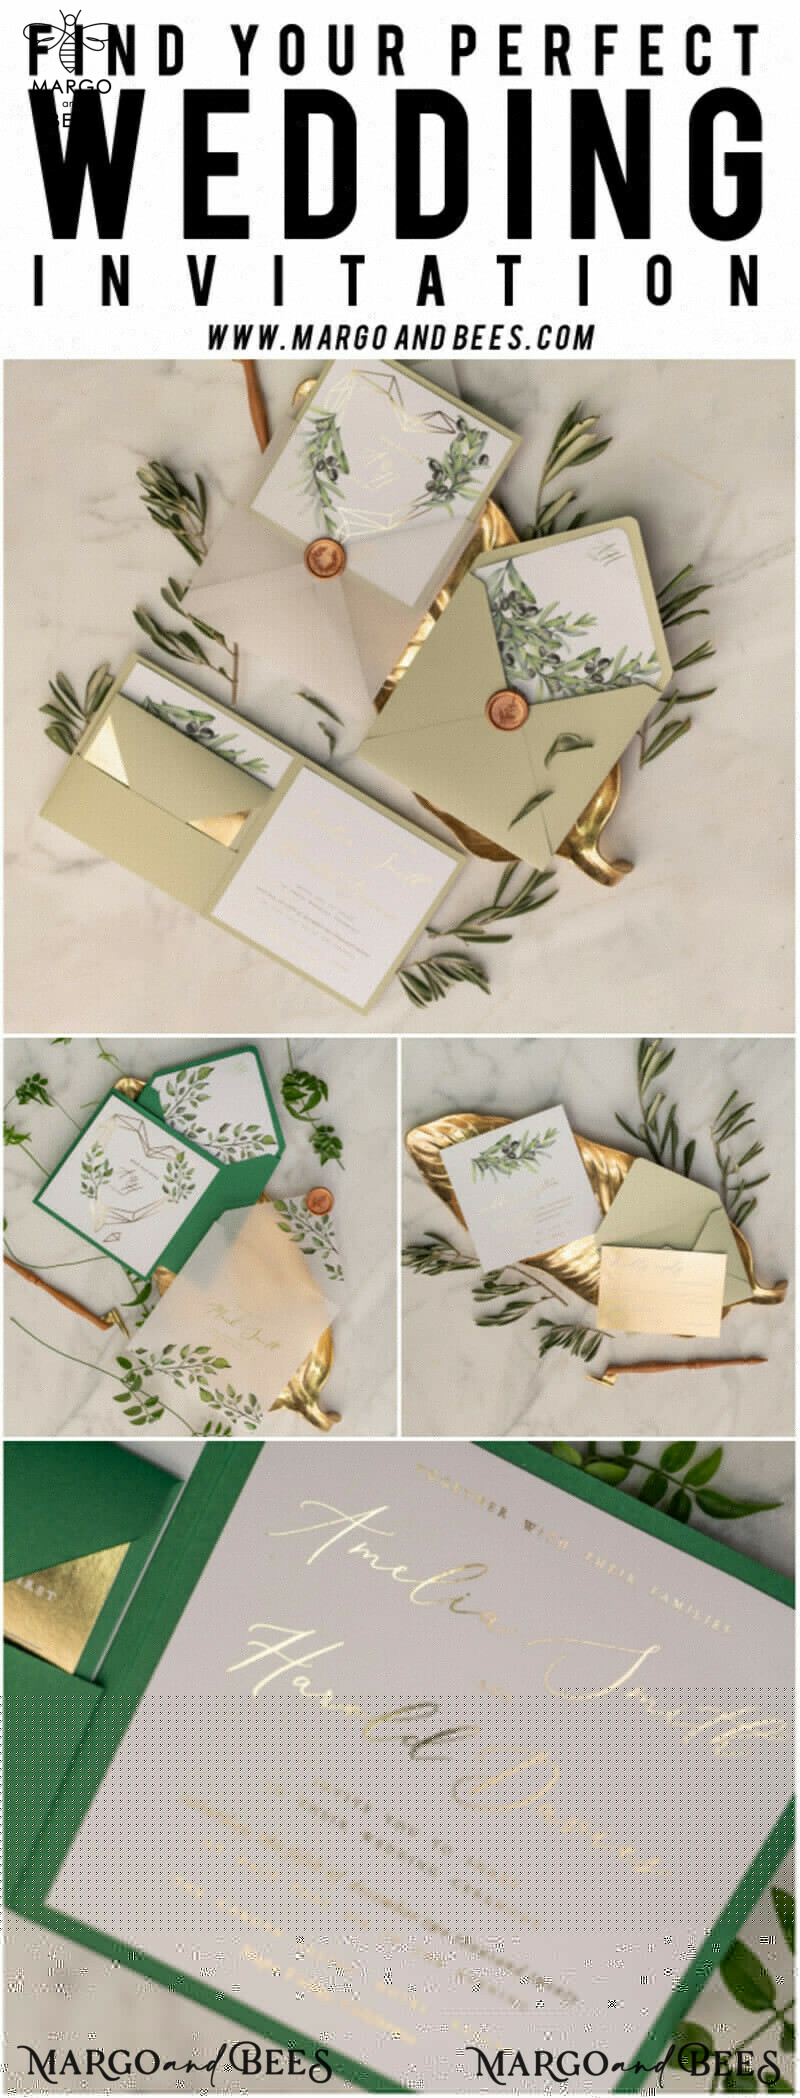 Create a Stunning Wedding with Elegant Olive Invitations, Luxury Sage Green Invites, and Glamourous Golden Pocketfold Cards from our Bespoke Tuscany Wedding Invitation Suite-12